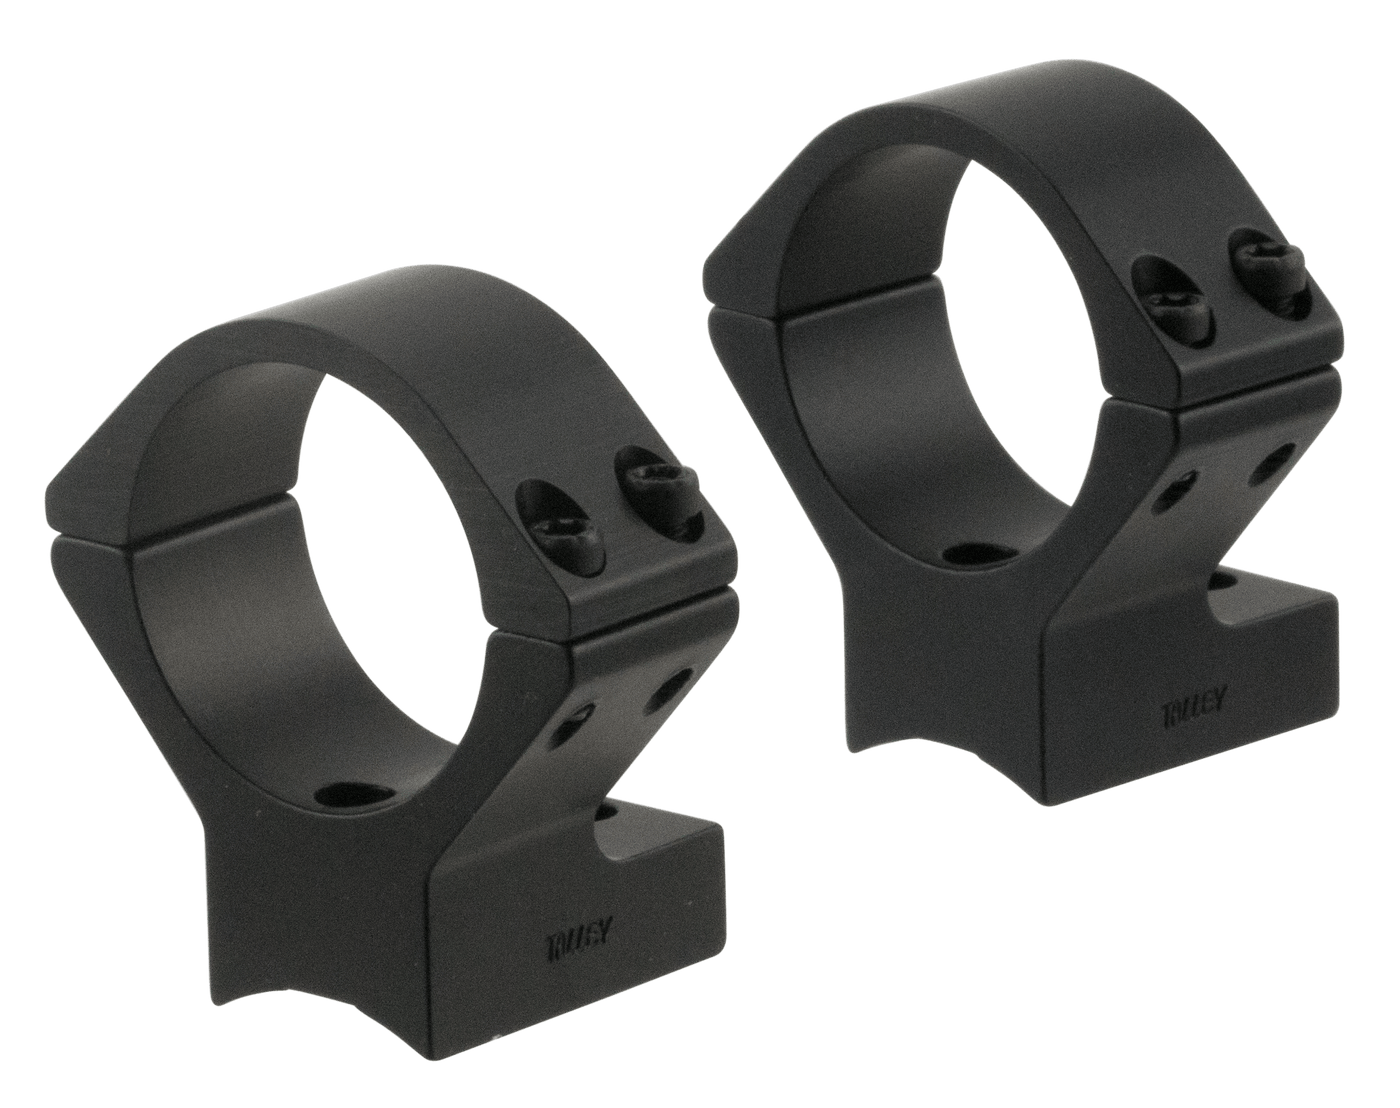 Talley Manufacturing Talley Rings Med 1" Savage Rnd - Rec/ruger American Blk Anodzd Scope Mounts And Rings